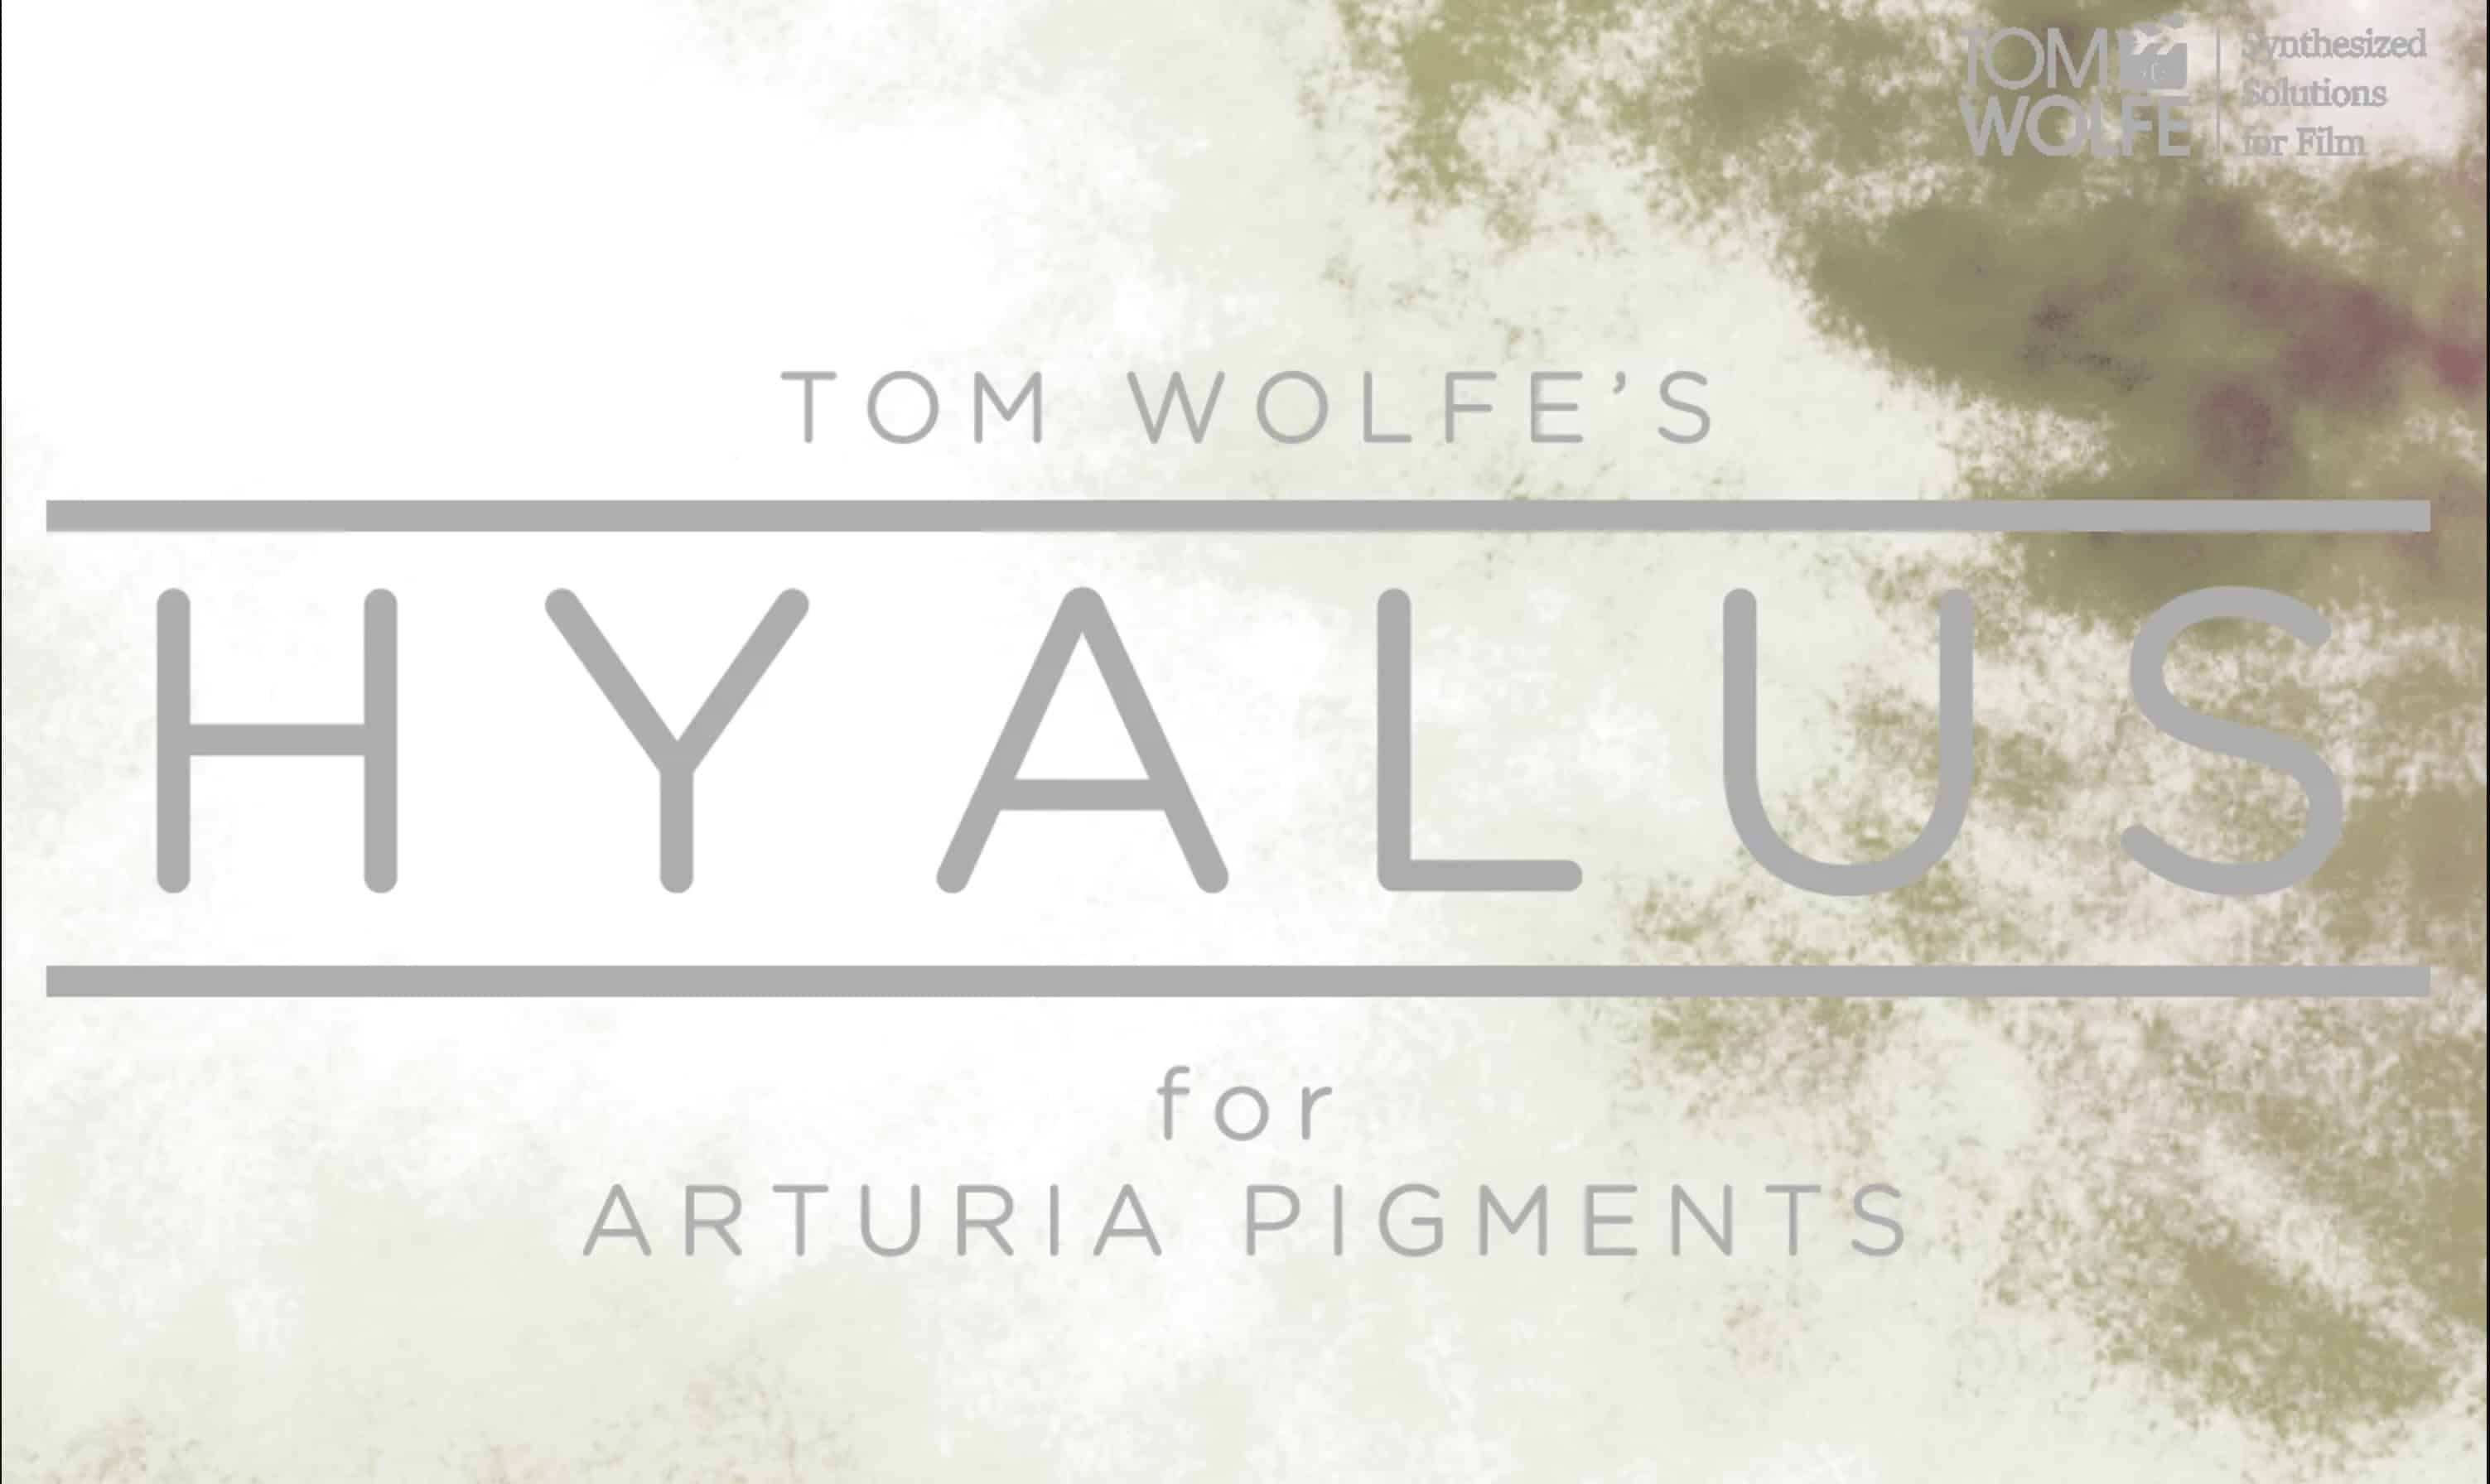 Hyalus Pigments – 100 Glassy, Ambient-style Patches For Arturia Pigments